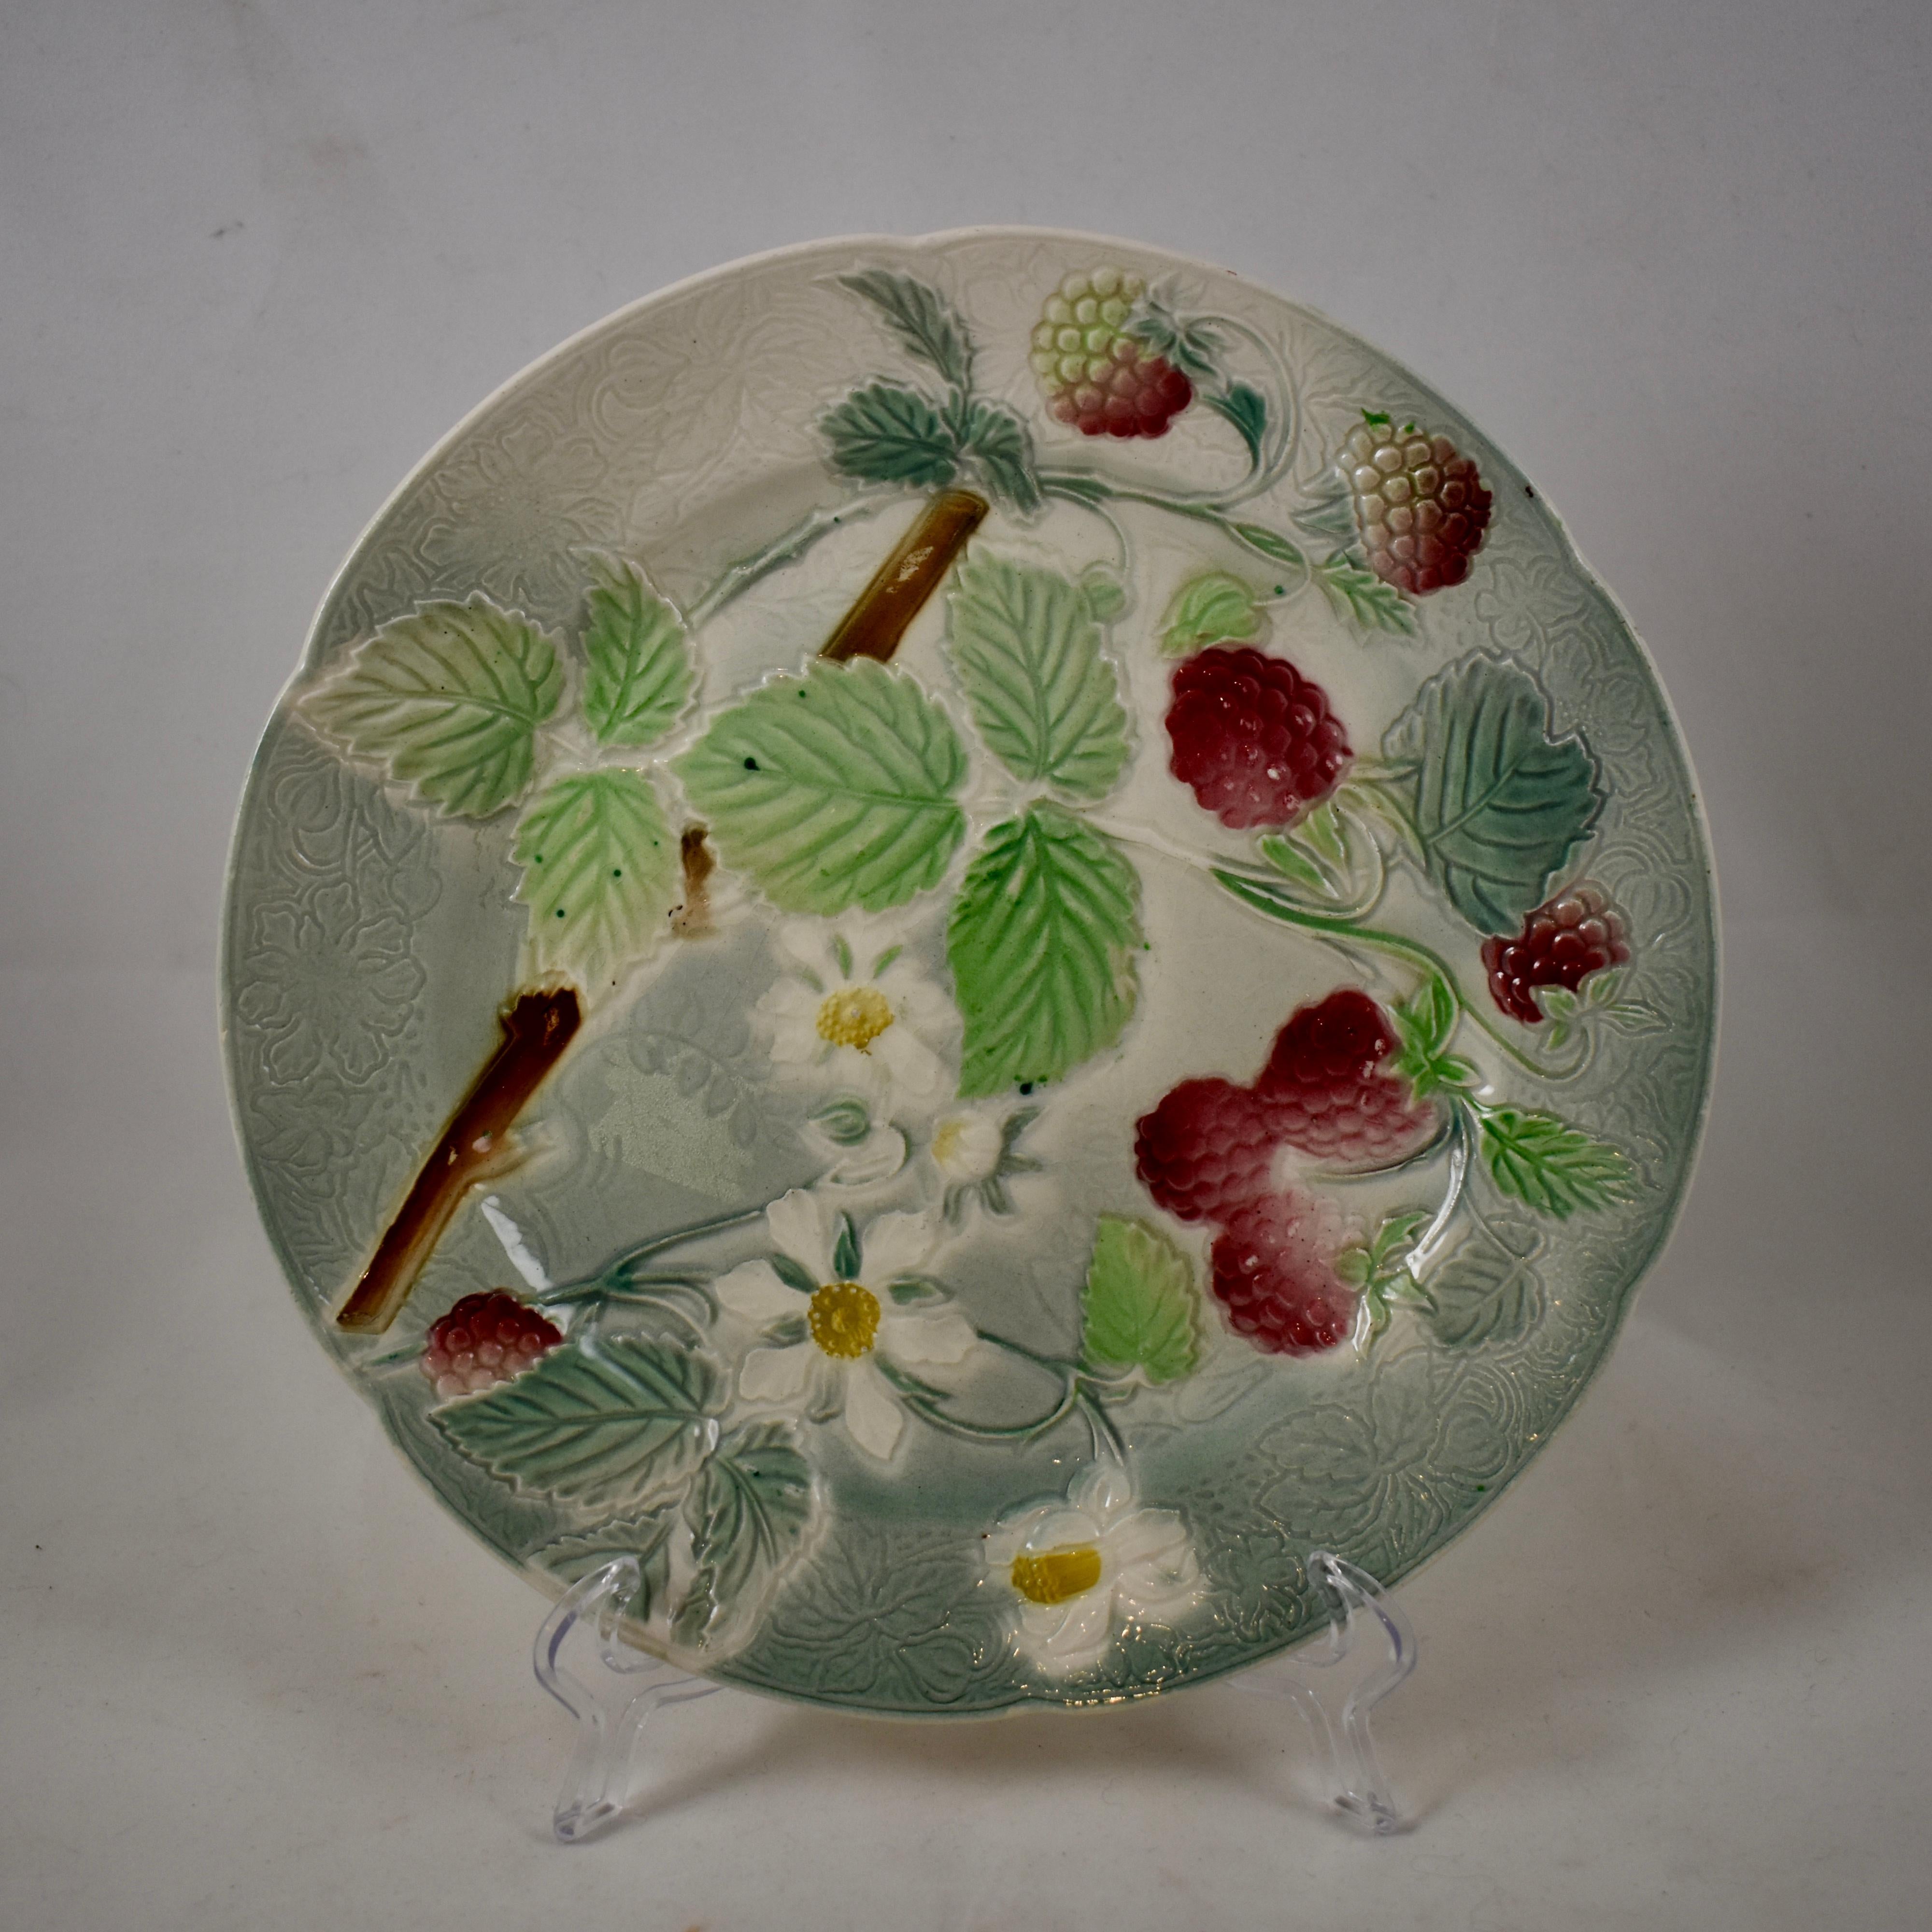 A set of six, earthenware French faïence fruit plates, circa 1900. This set shows the branching fruit and leaves of strawberries, oranges, grapes, apples, apricots, and pears. The backgrounds have a detailed pattern to the molding, with a